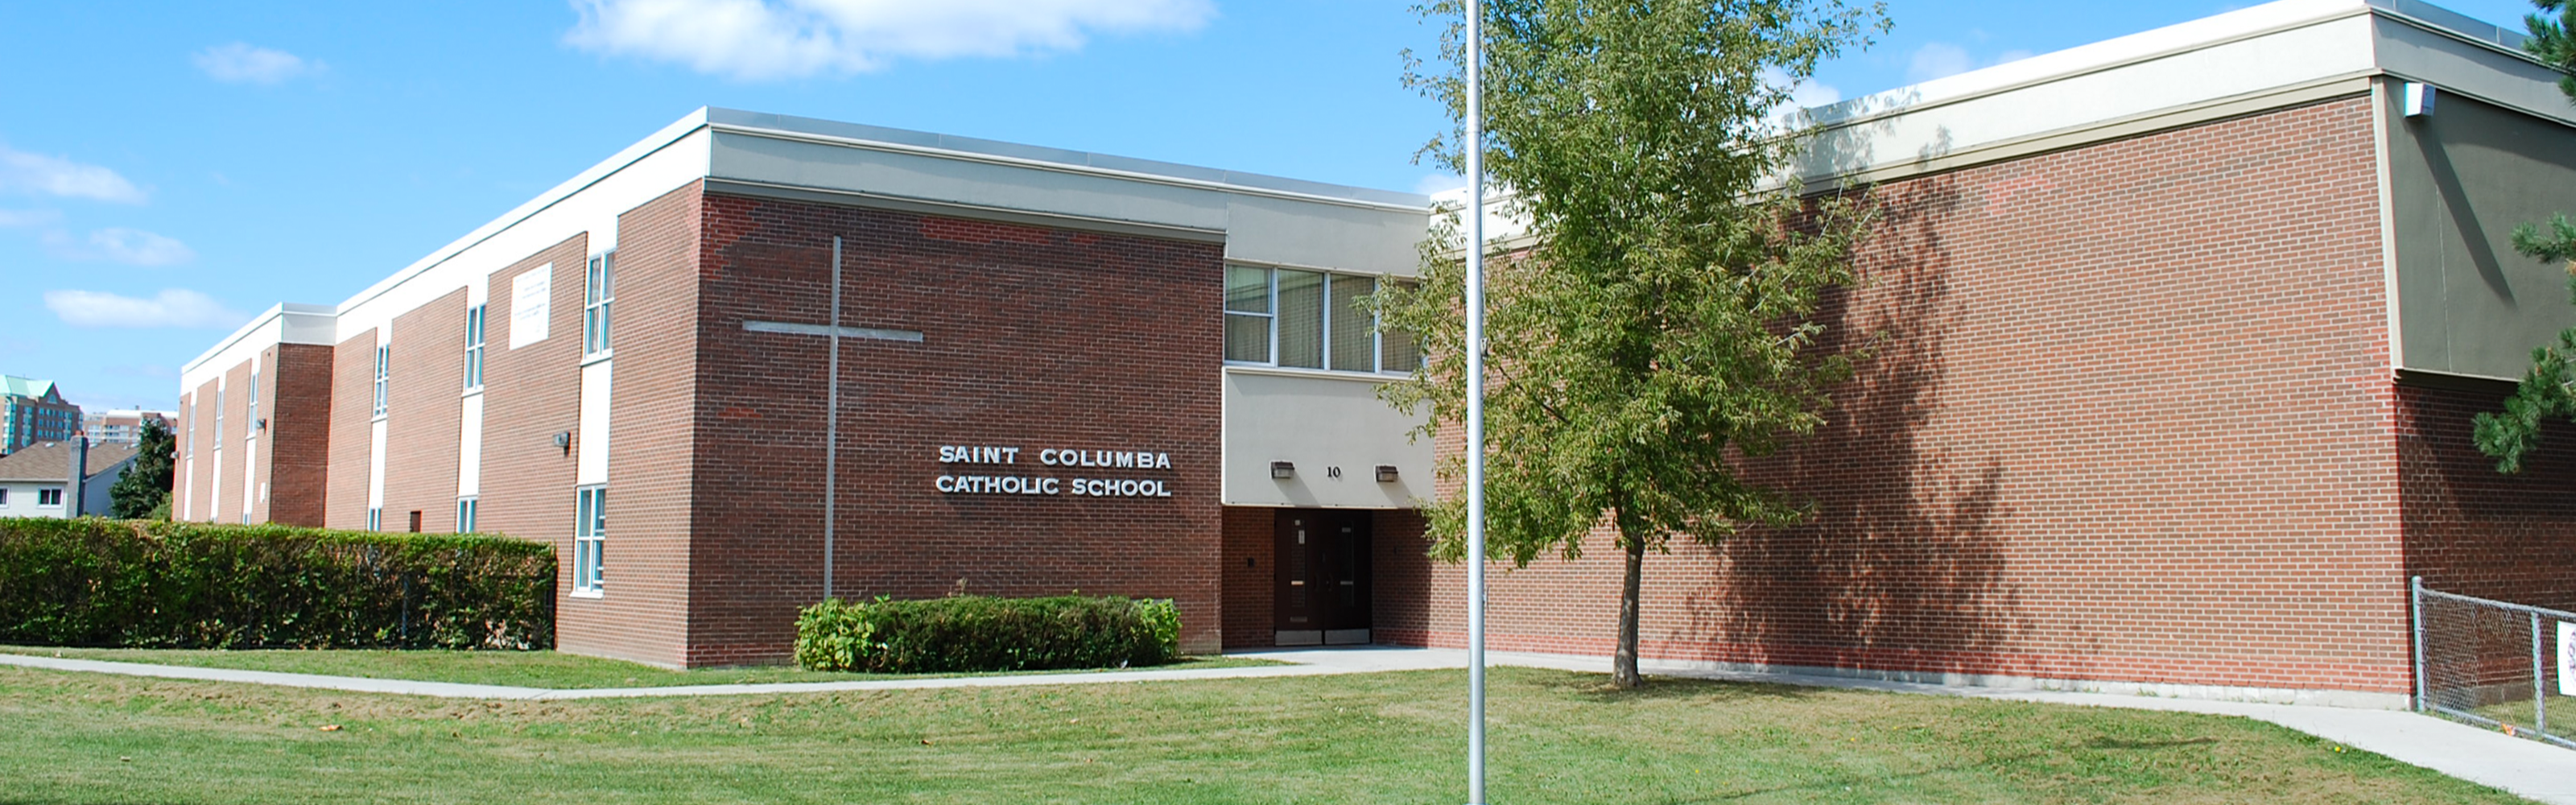 The front of the St. Columba Catholic School building.